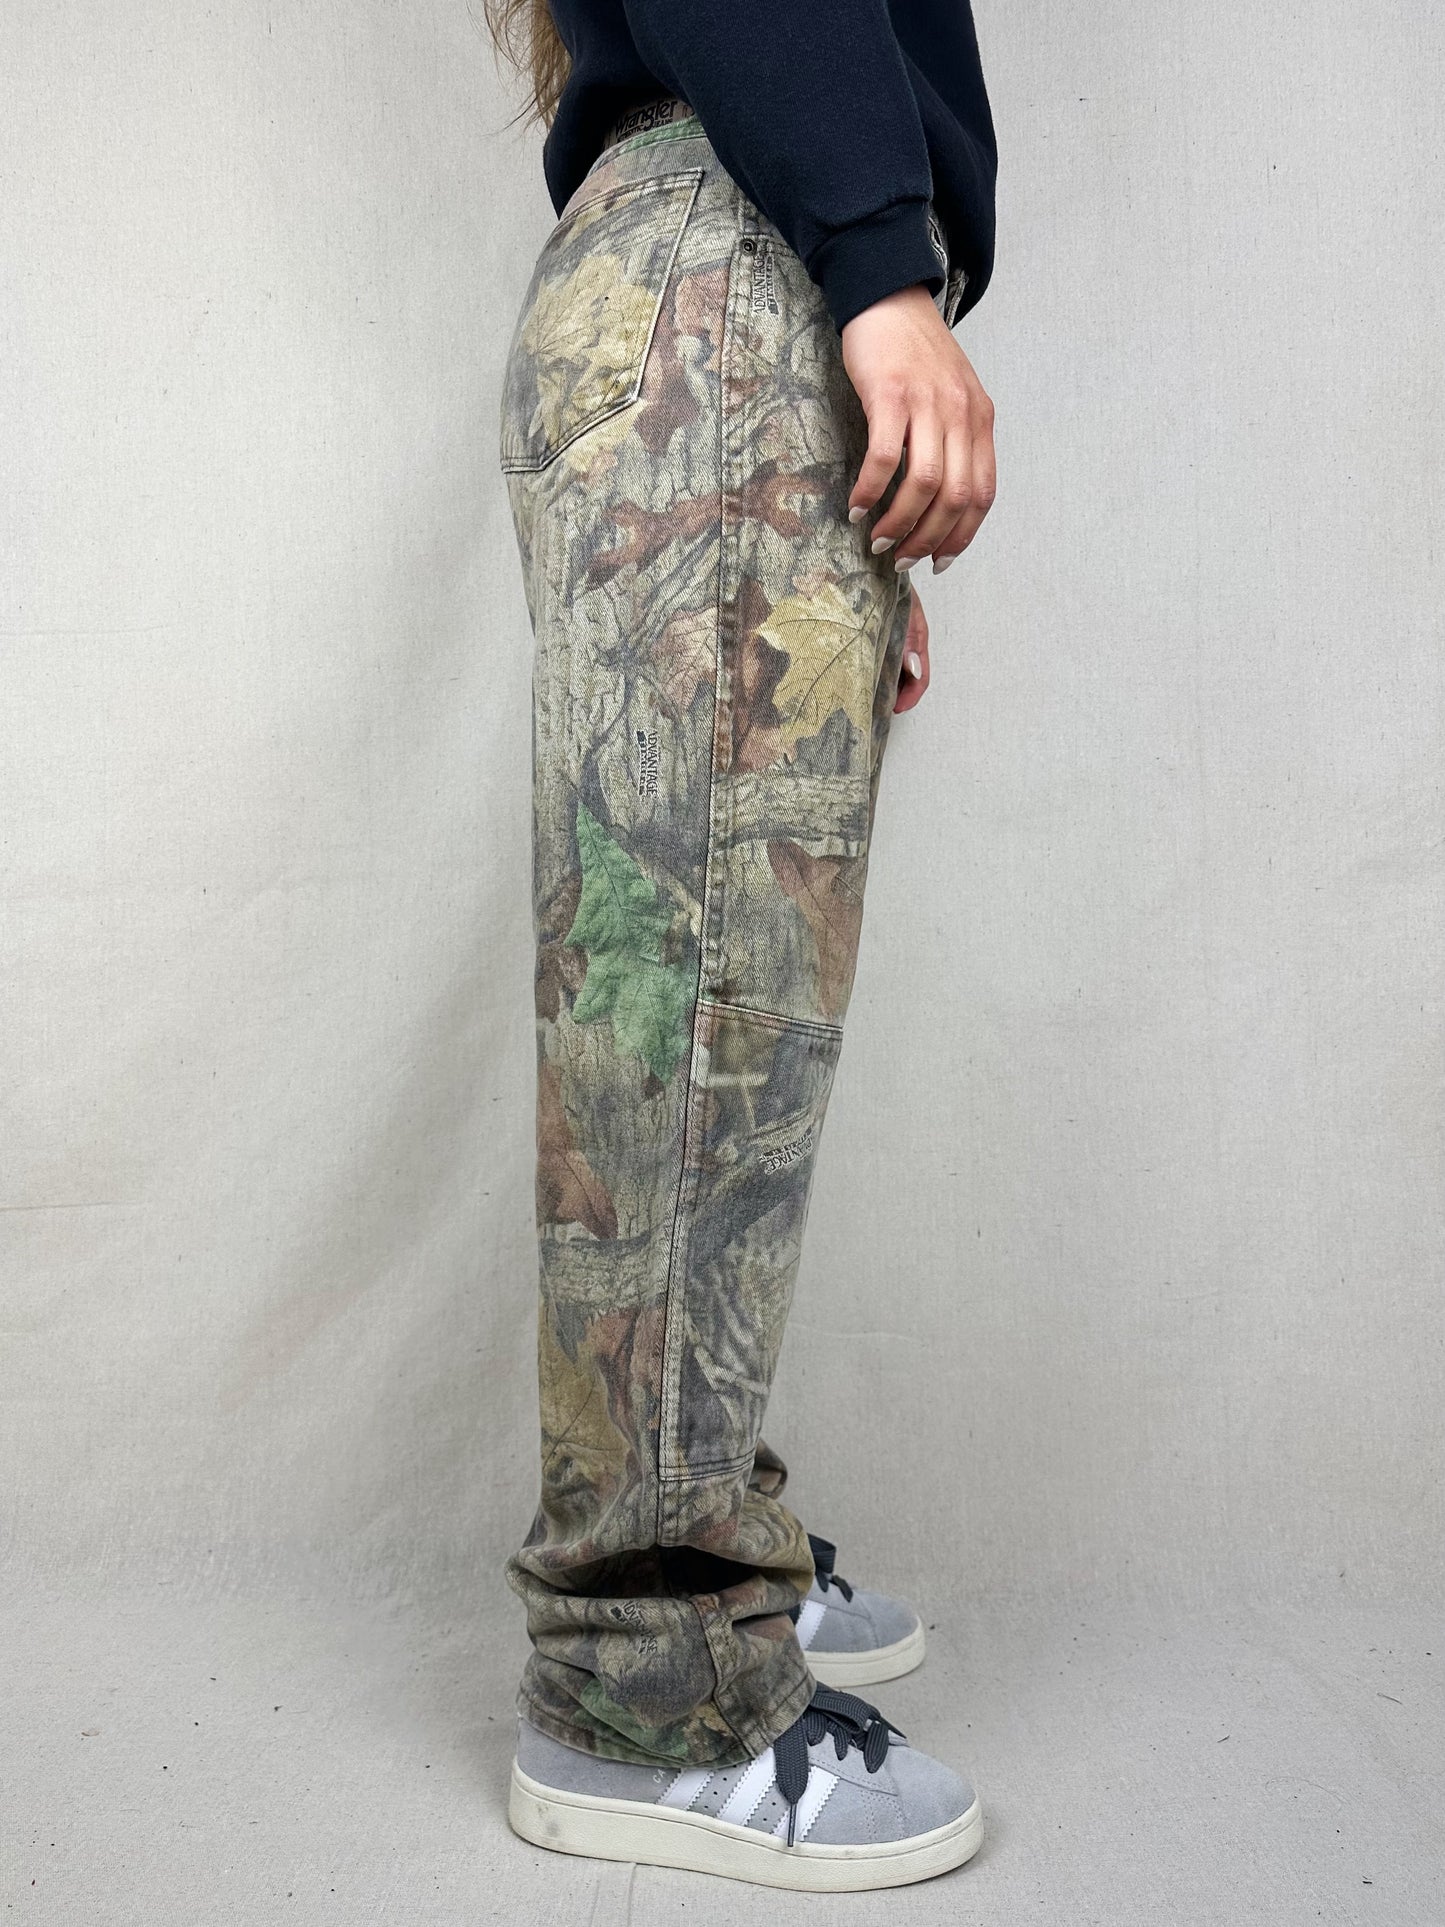 90's Realtree Camo Vintage Double Knee Jeans Size 31x32